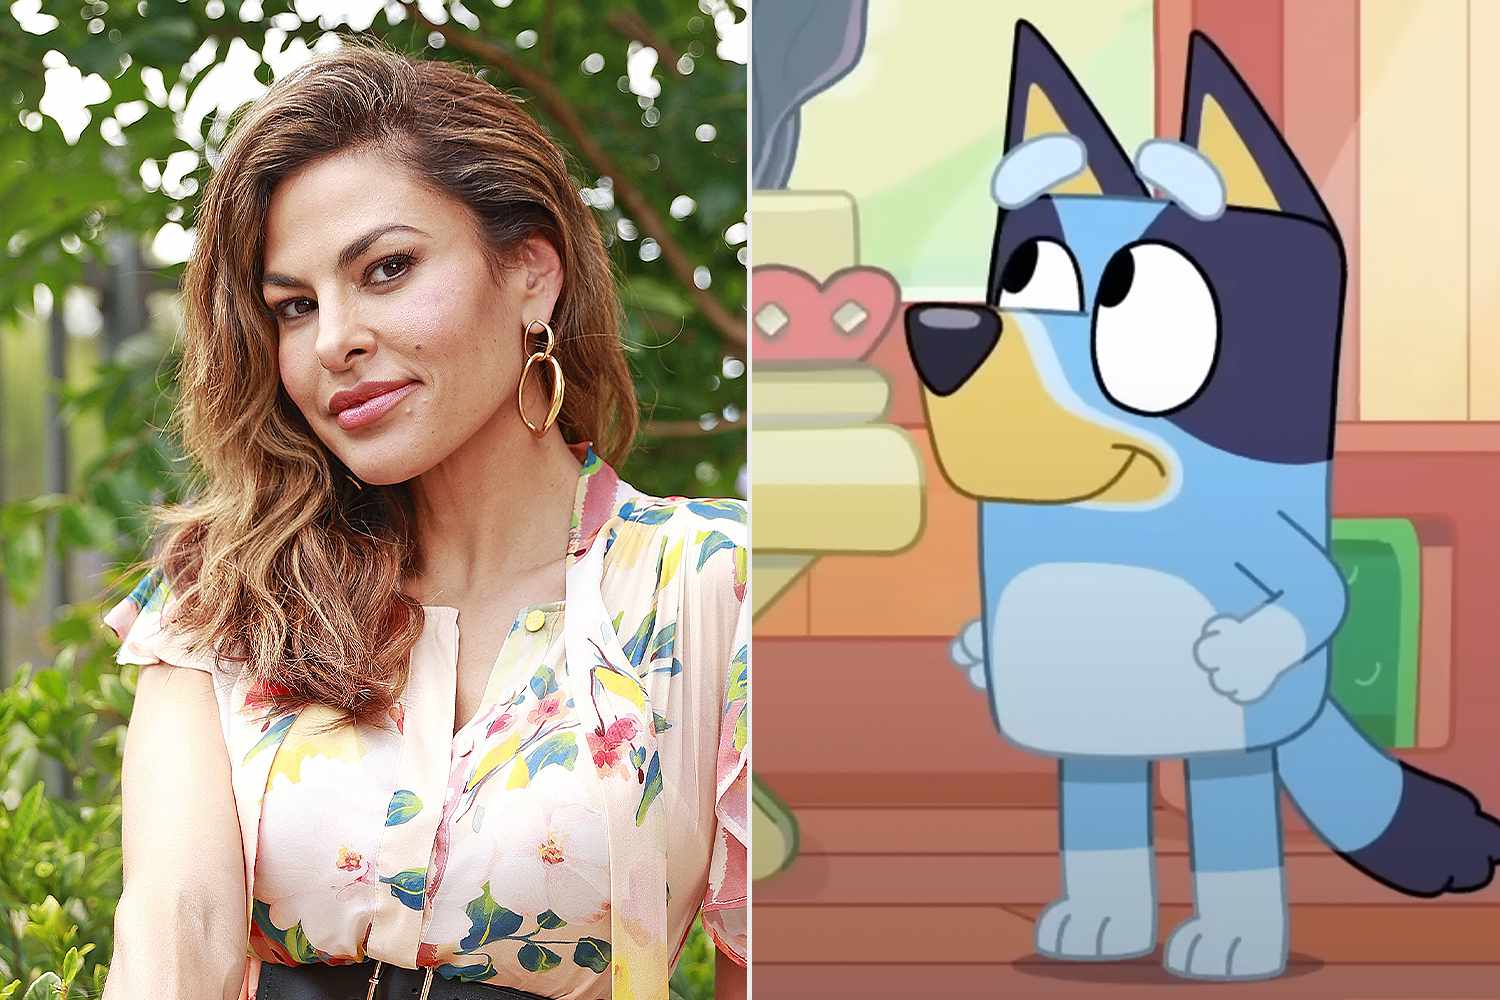 Eva Mendes Is the Latest Celebrity to Lend Her Voice to the New “Bluey” Online Digital Book Series